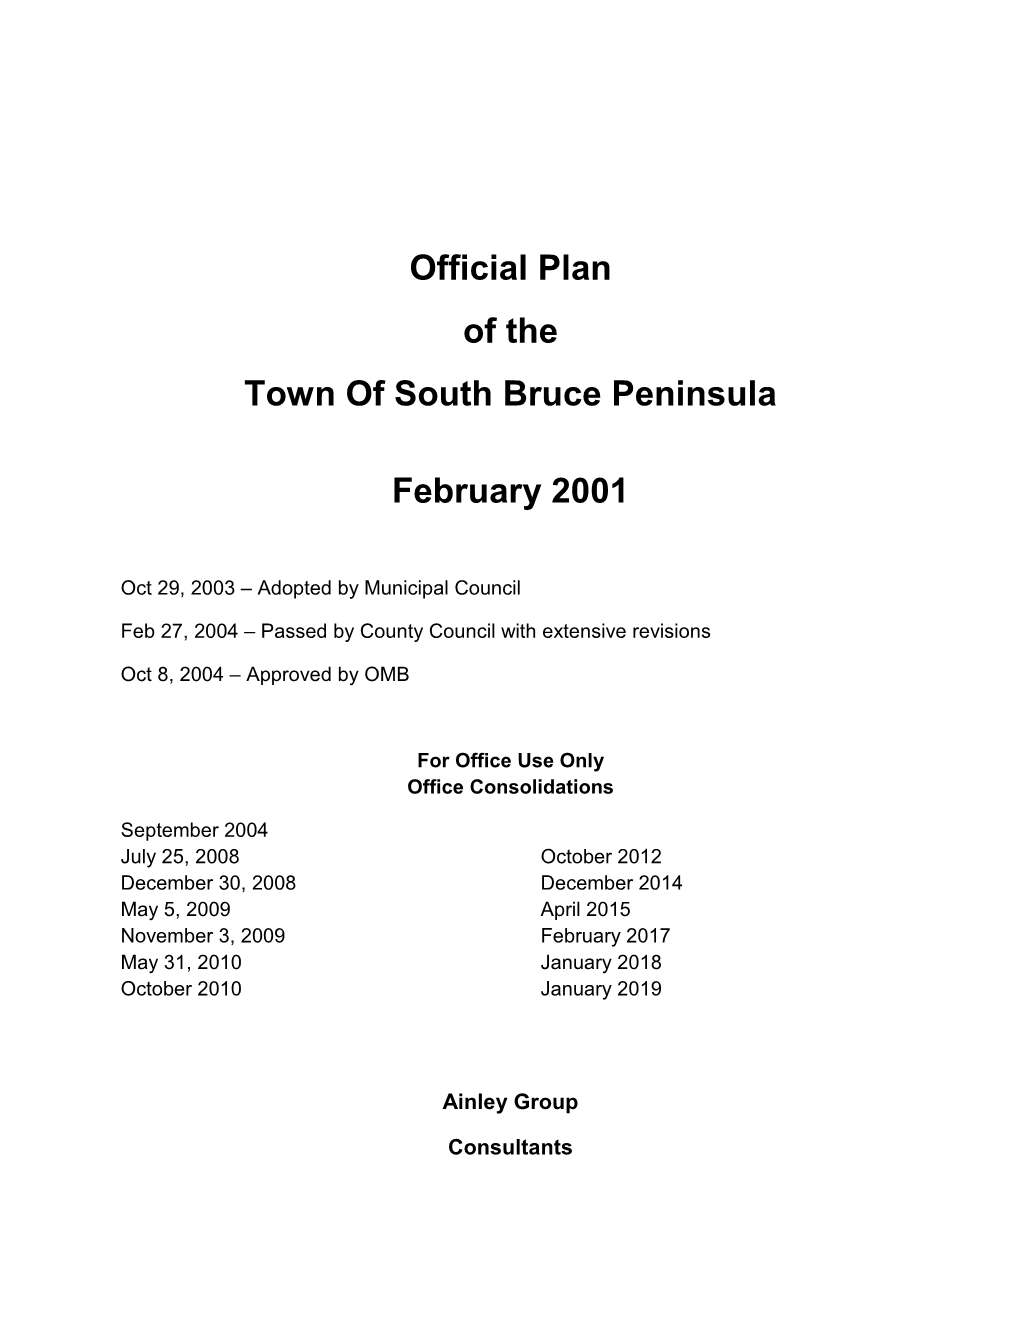 Official Plan of the Town of South Bruce Peninsula February 2001